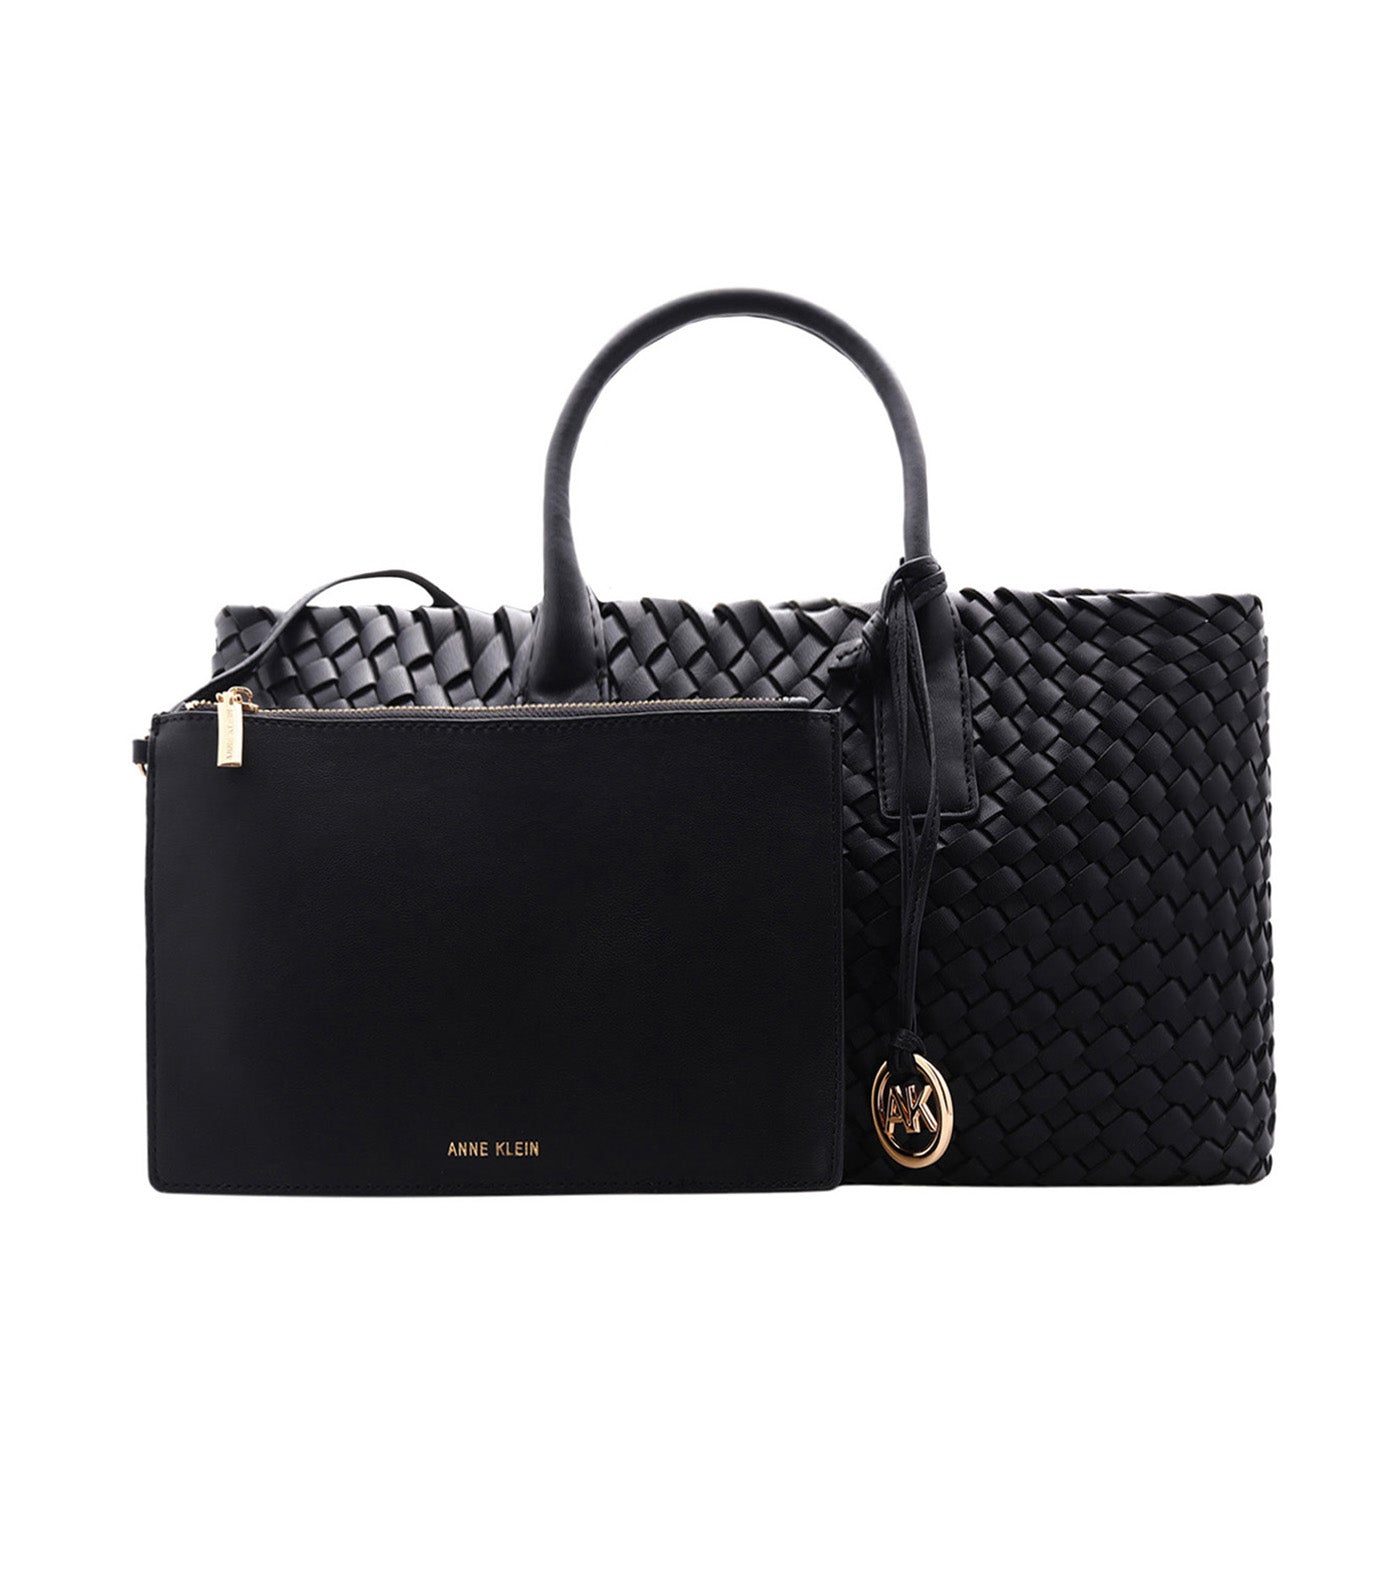 Large Woven Tote with Detachable Pouch Black